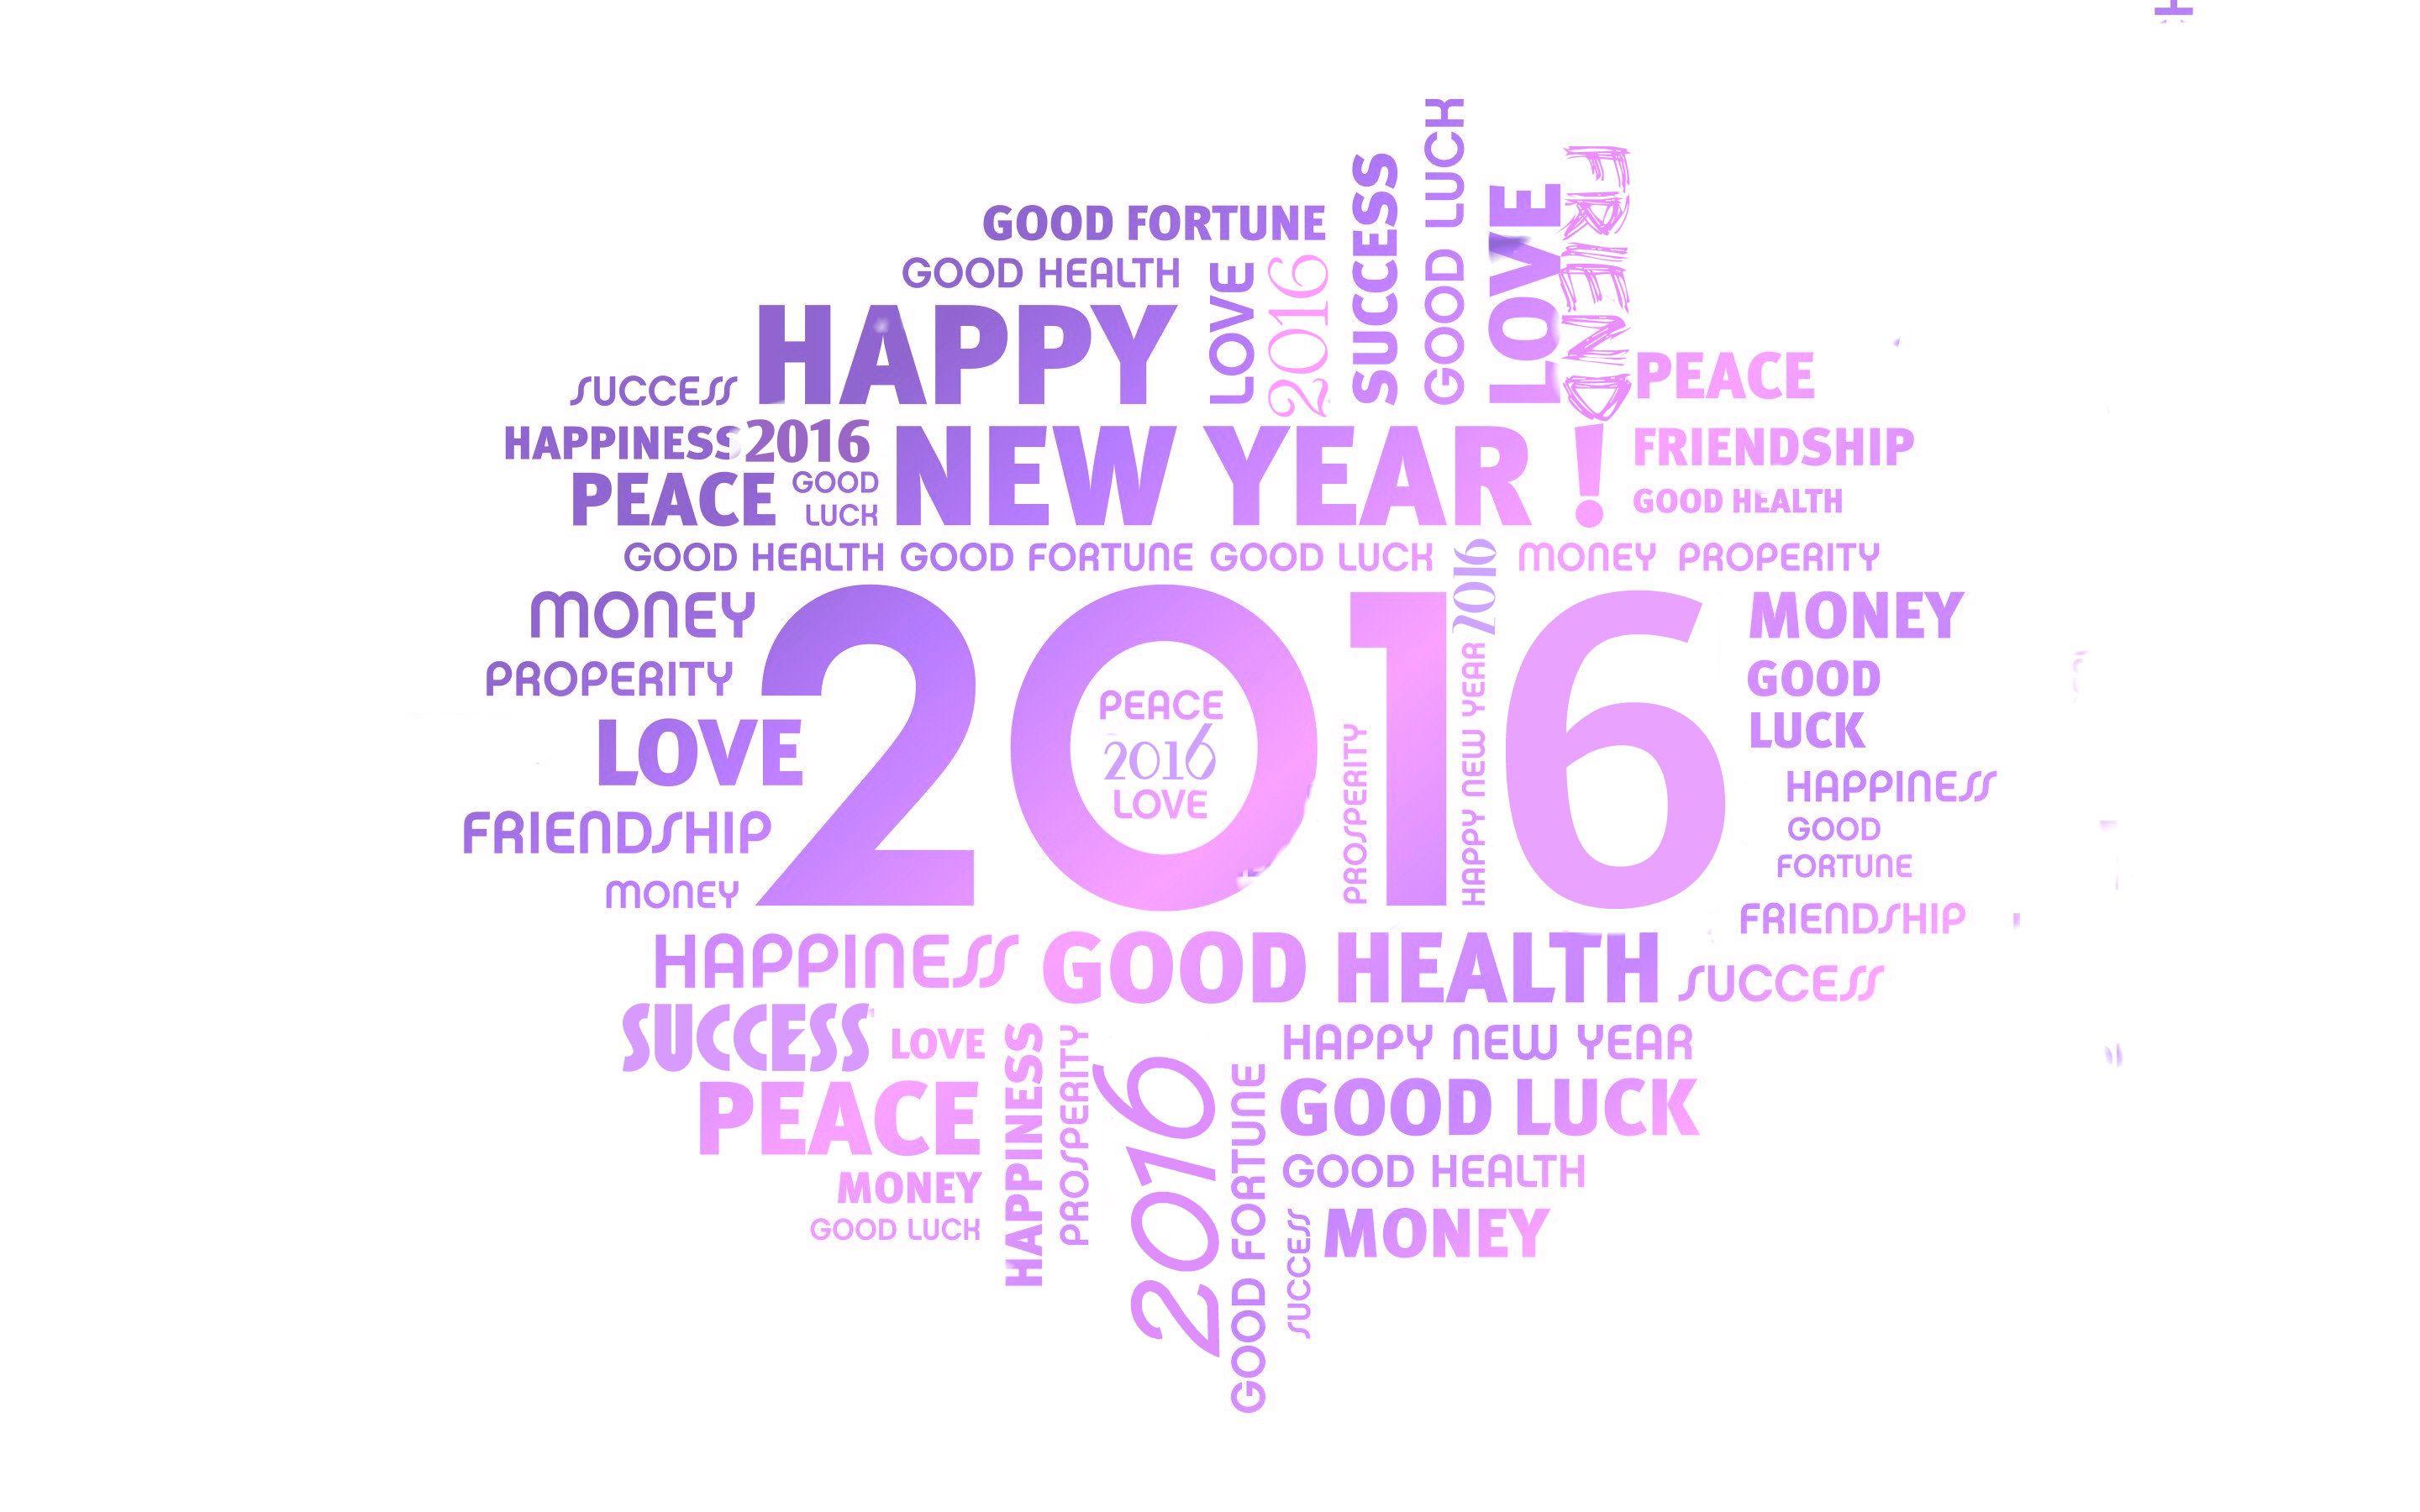 Happy New Year 2016 Wallpaper, Image and Picture. Wallpaper